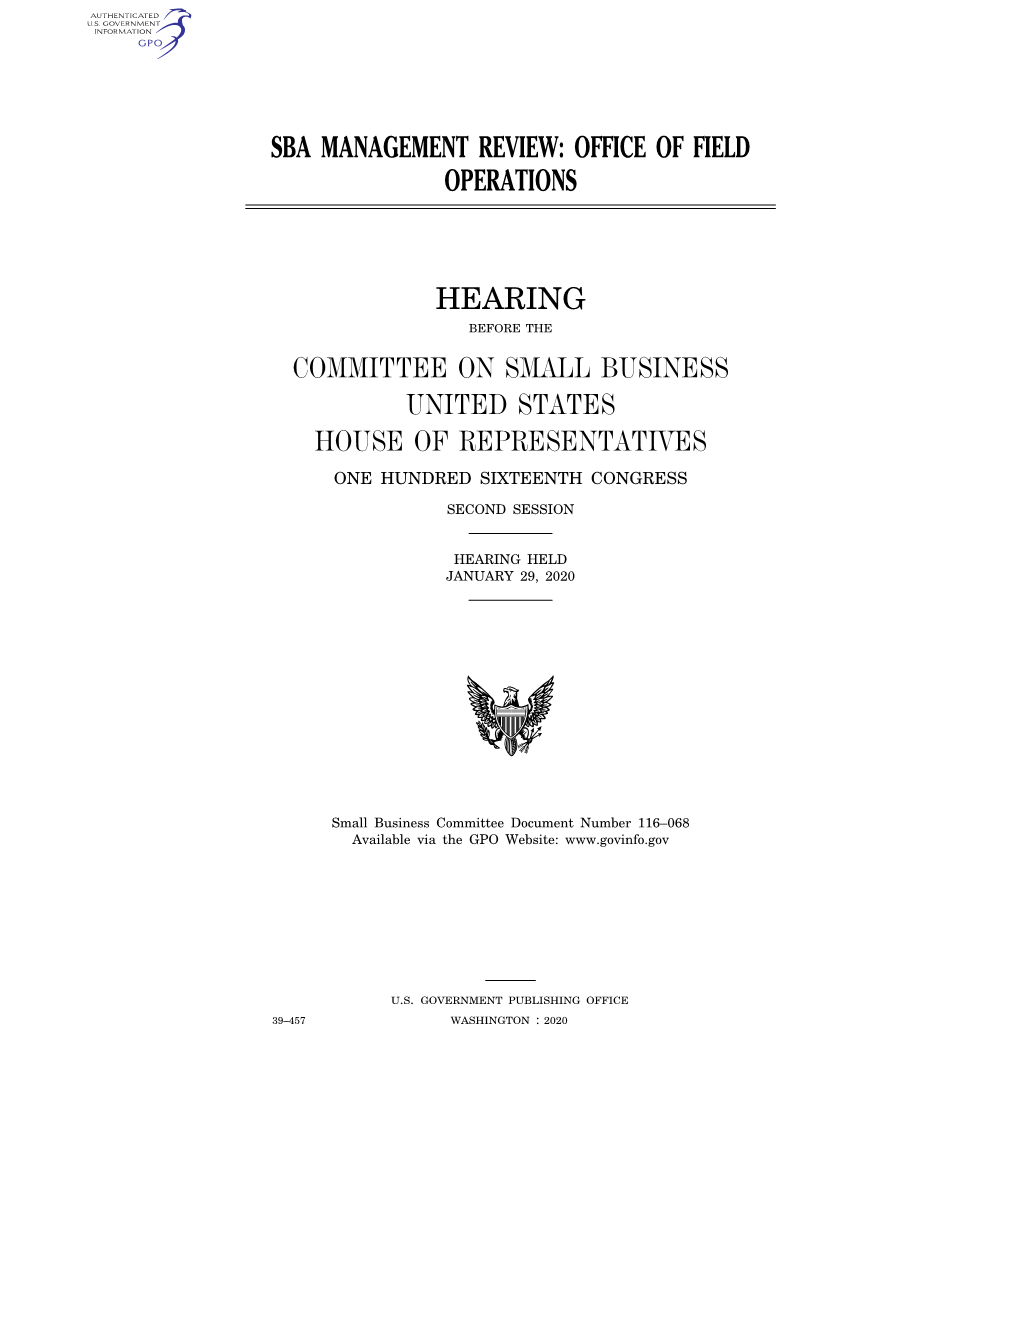 Sba Management Review: Office of Field Operations